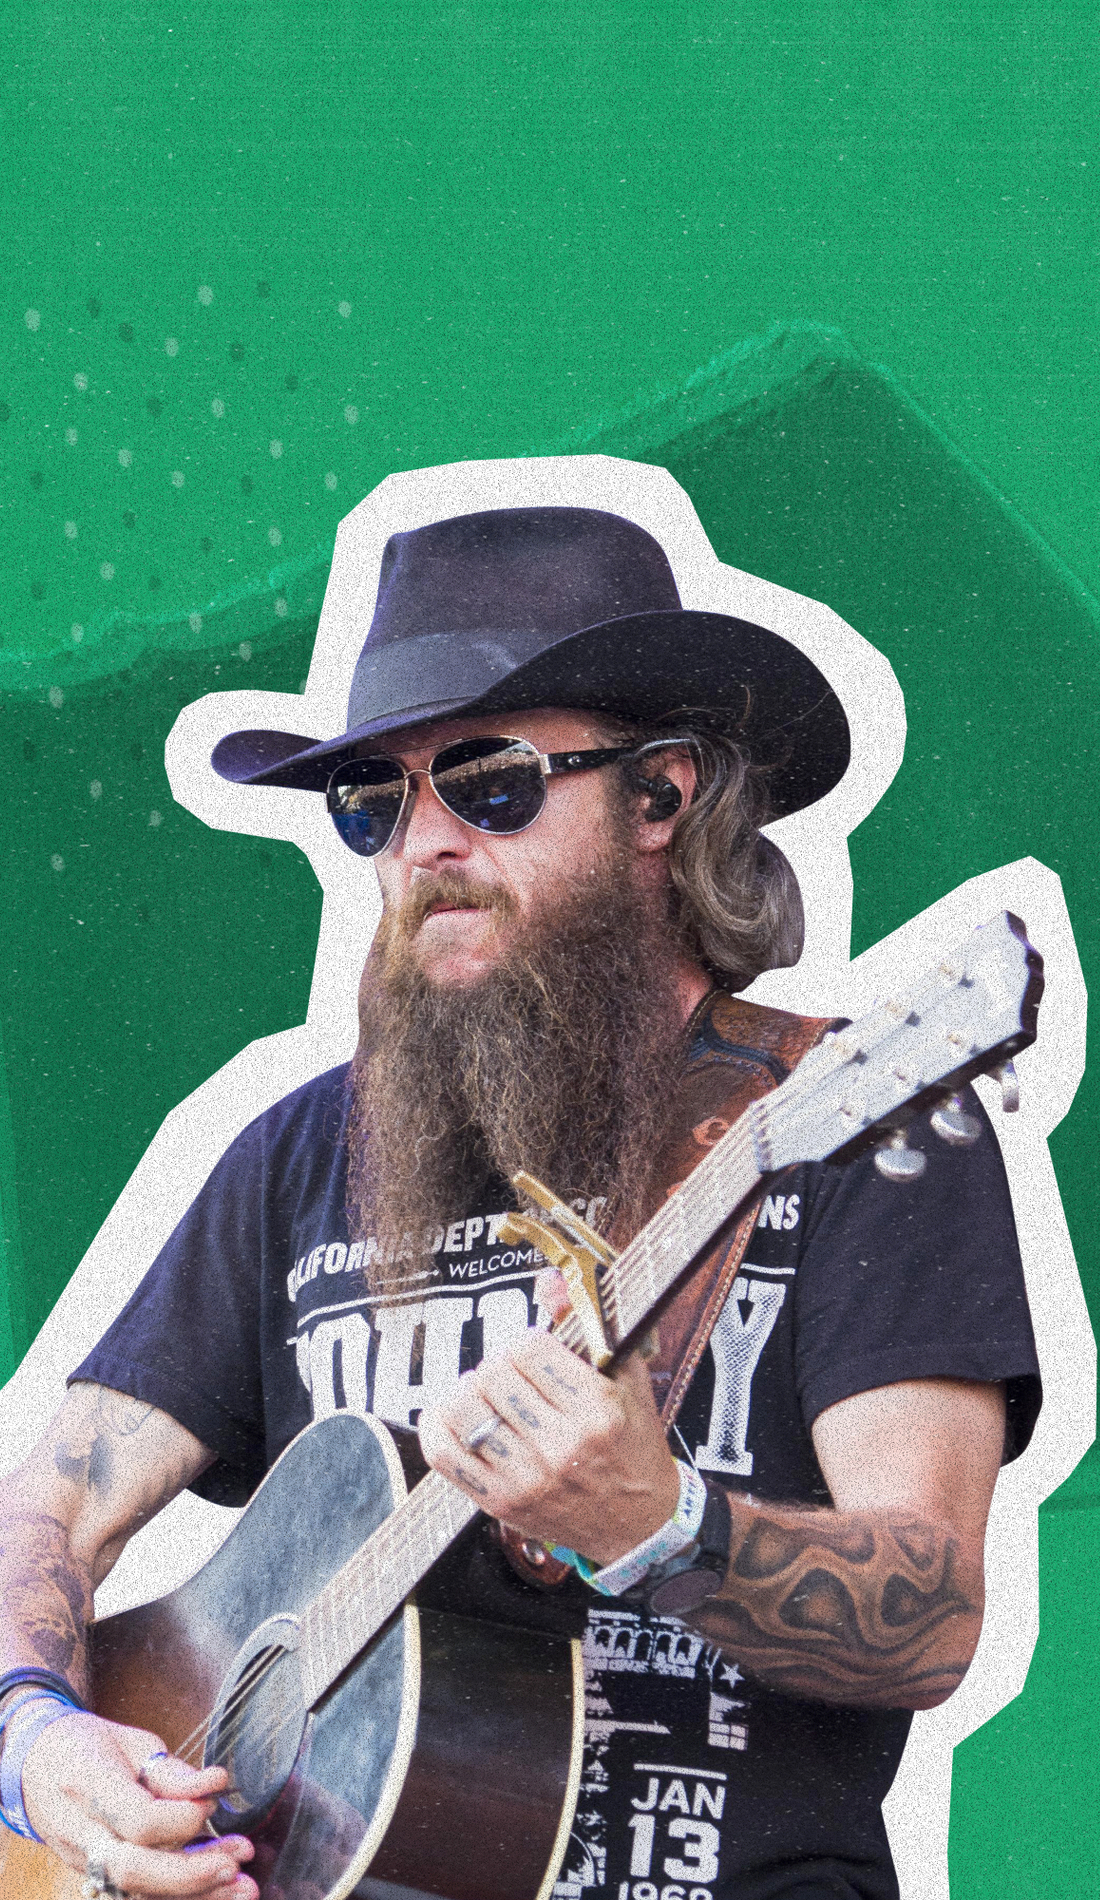 A Cody Jinks live event